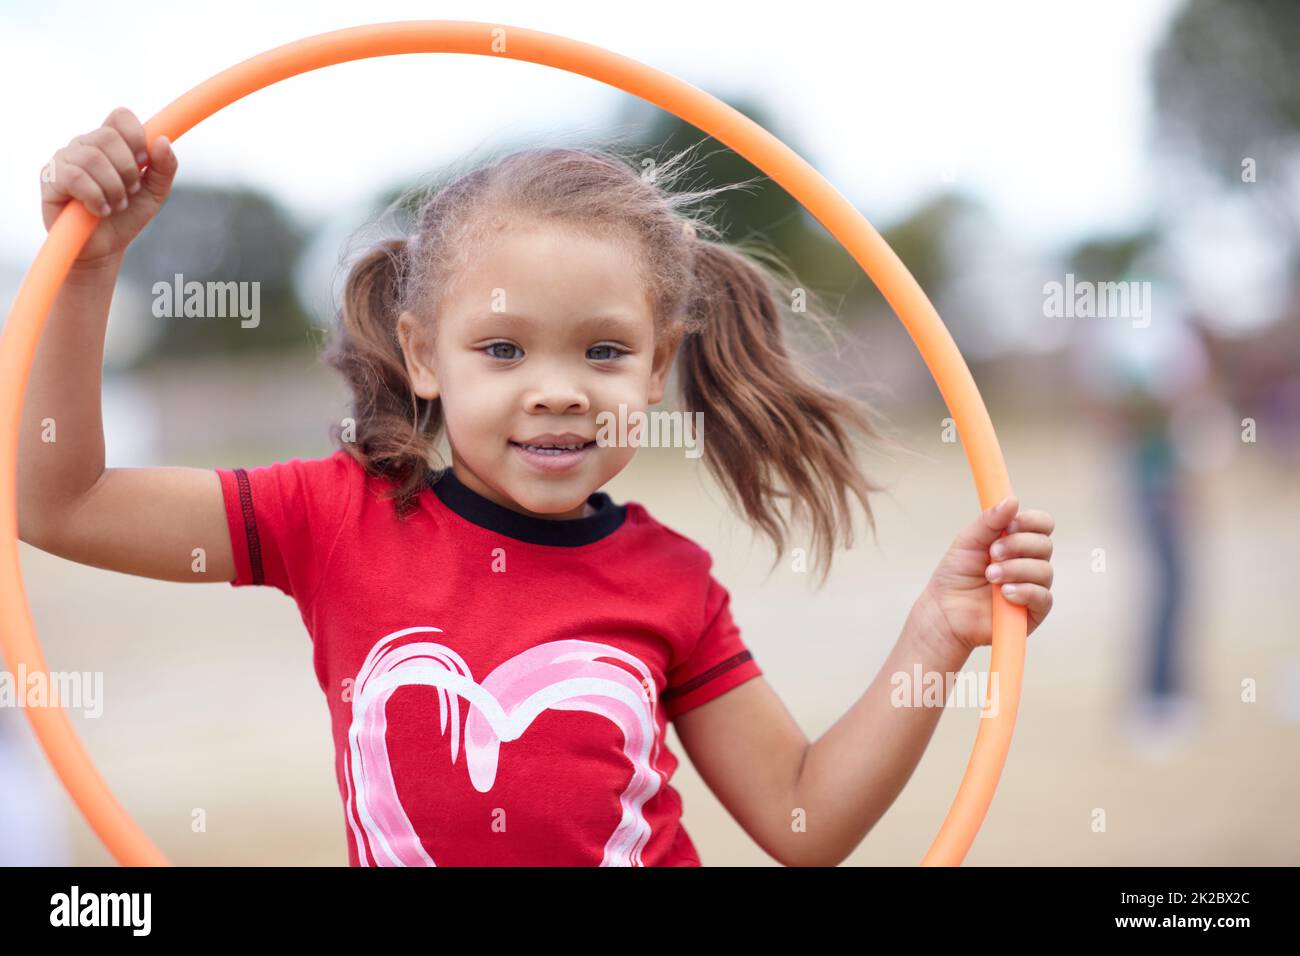 Little miss hula hoop. Cute little preschooler playing with a hula hoop while outdoors. Stock Photo